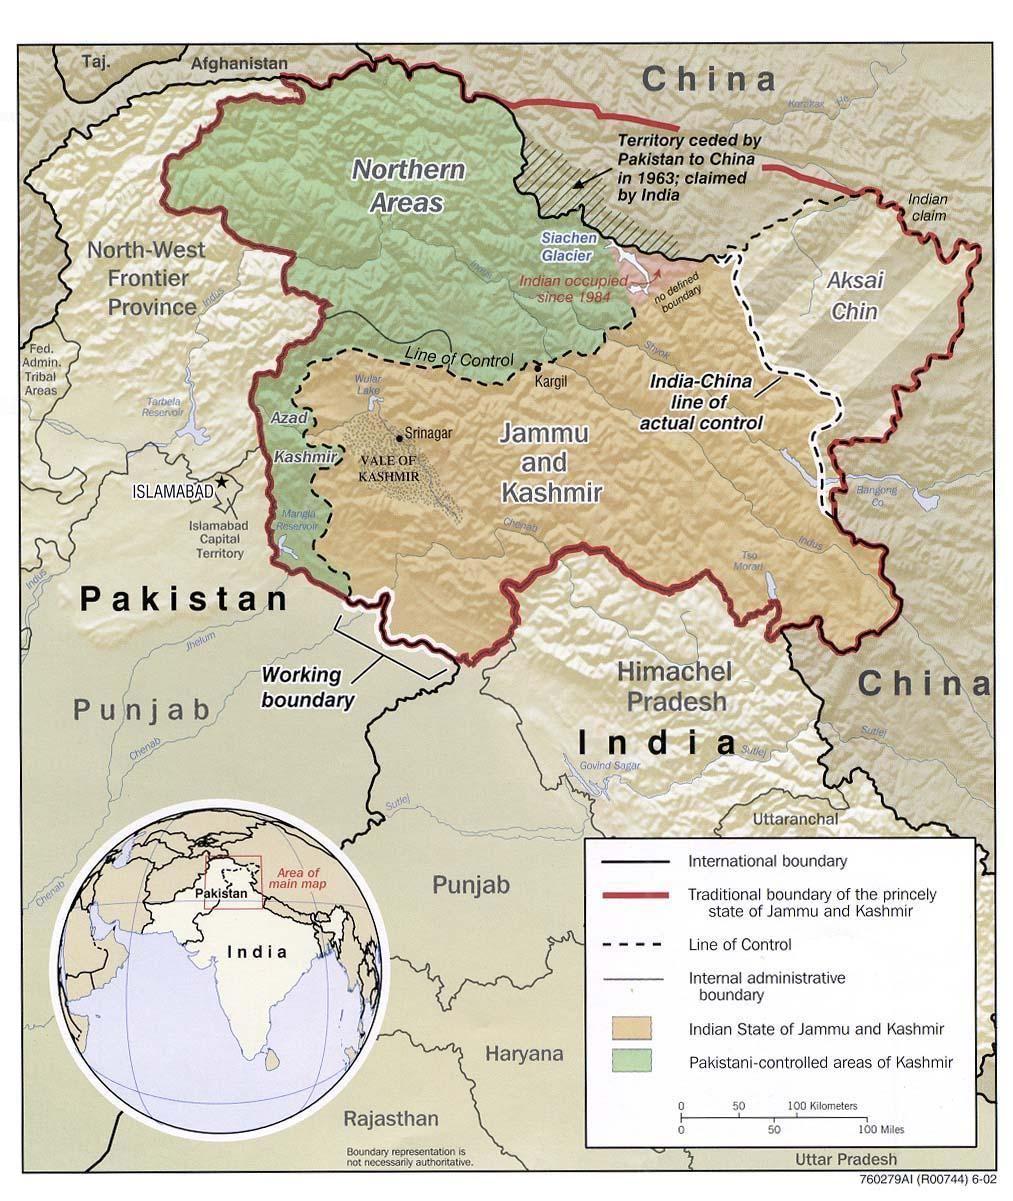 ICG Asia Report N 79, 24 June 2004 Page 28 APPENDIX A MAP OF KASHMIR